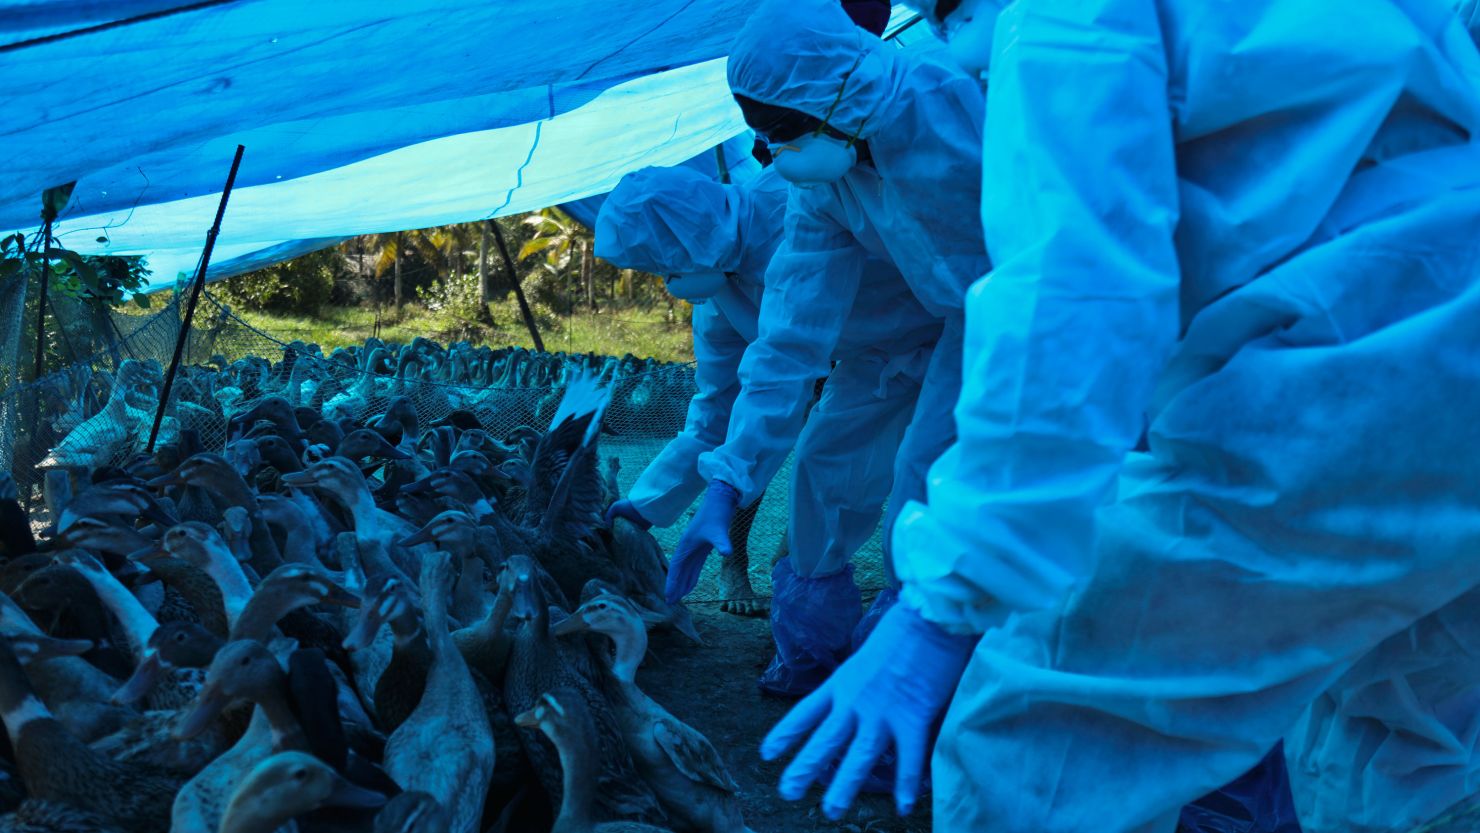 Health workers begin culling ducks after avian flu was detected among domestic birds in Alappuzha district, Kerala state, India, on January 5, 2021.